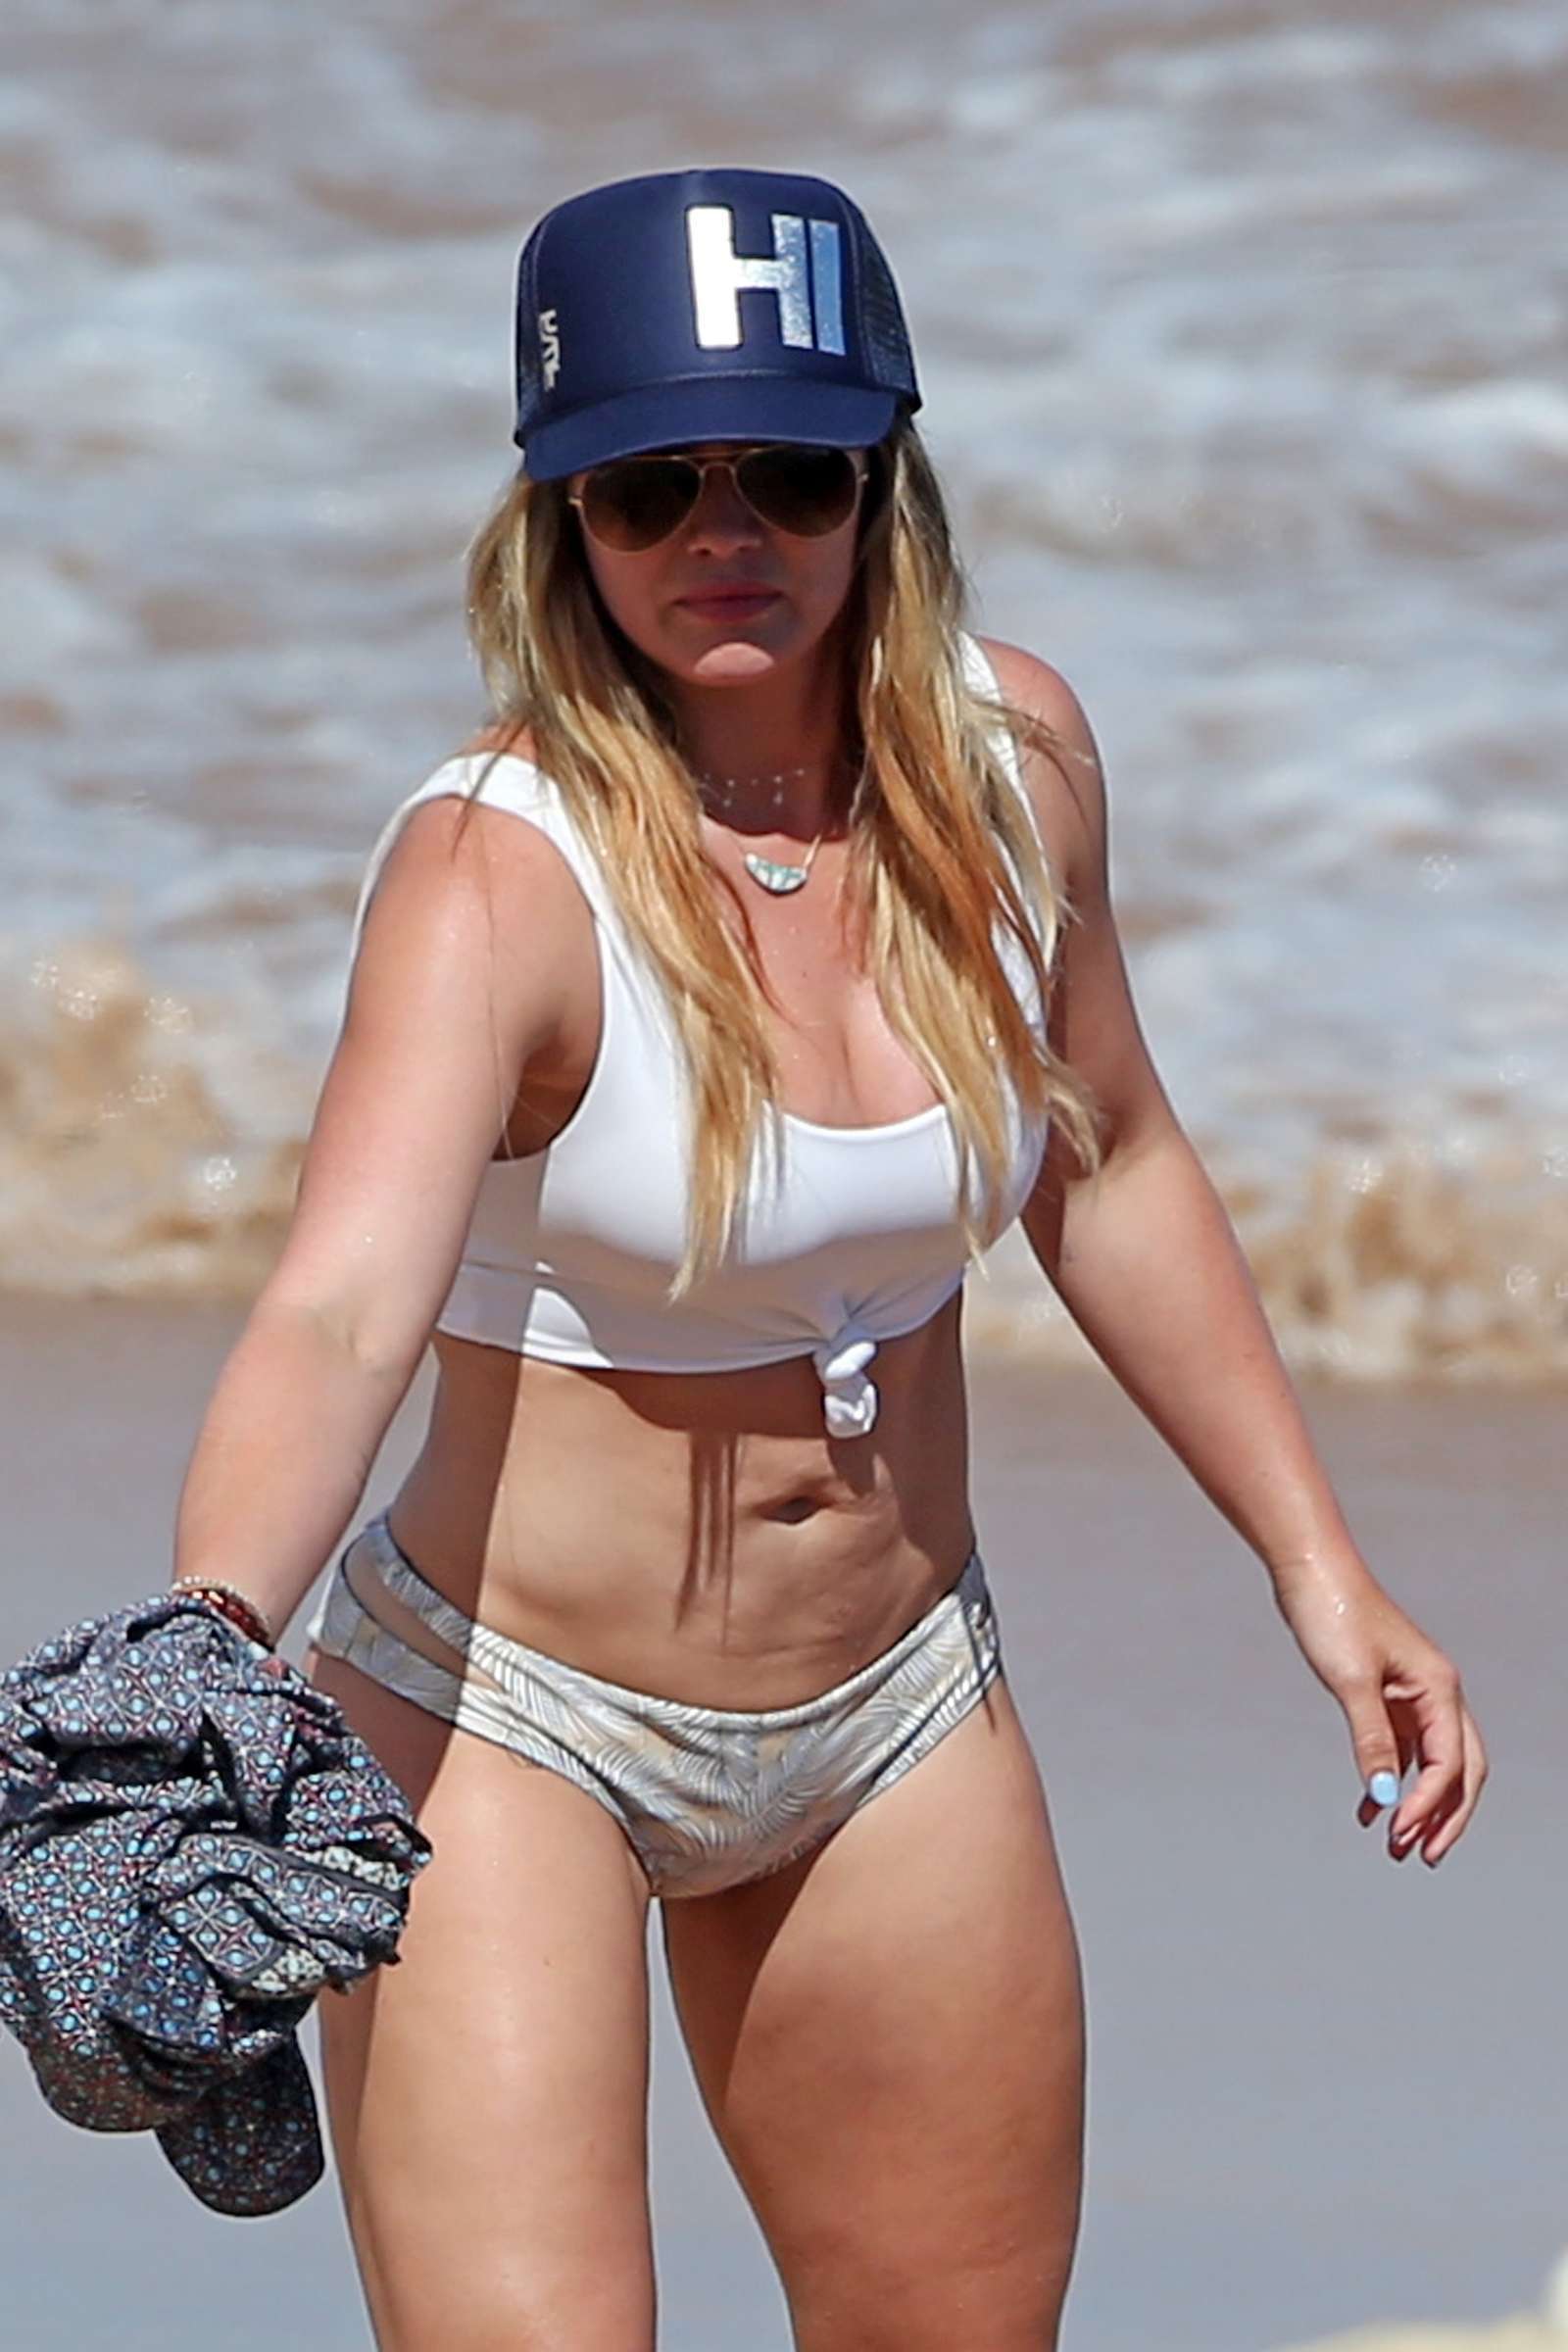 Duiker Pathologisch Allergie Hilary Duff in Bikini at the beach in Maui | Indian Girls Villa - Celebs  Beauty, Fashion and Entertainment